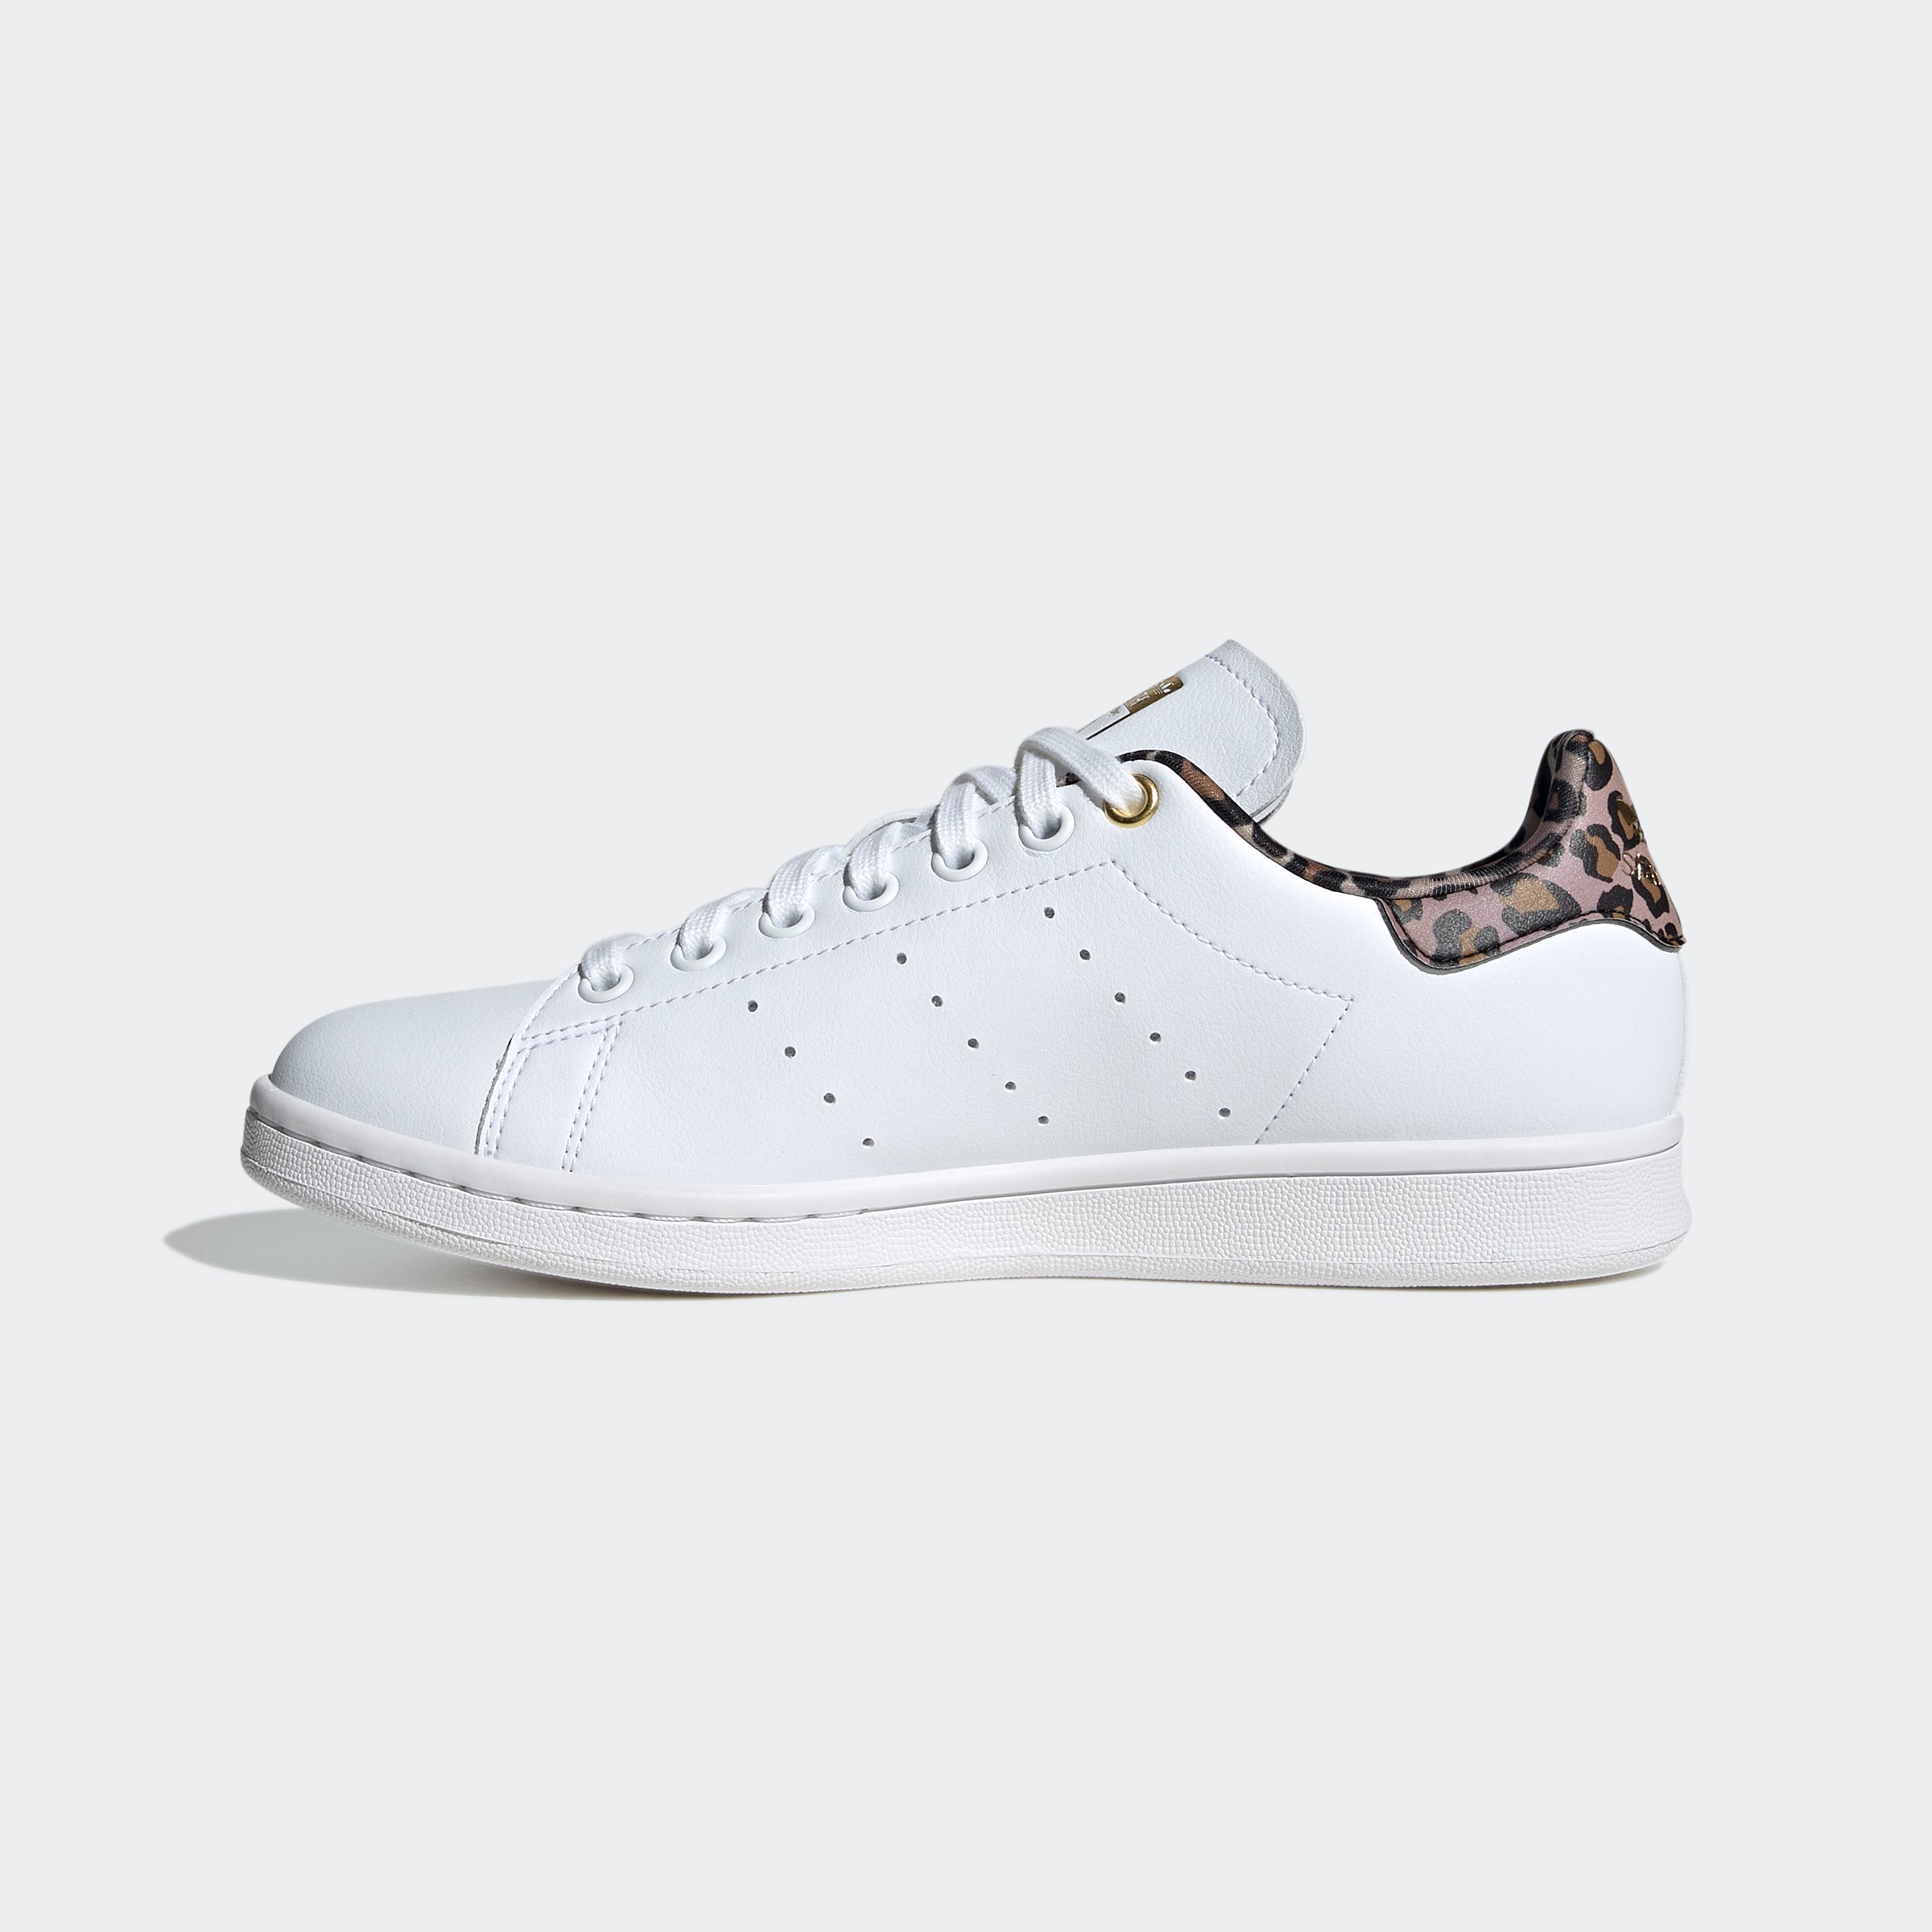 Lui stapel residentie Women's adidas Stan Smith Shoes Leopard Print | Chicago City Sports